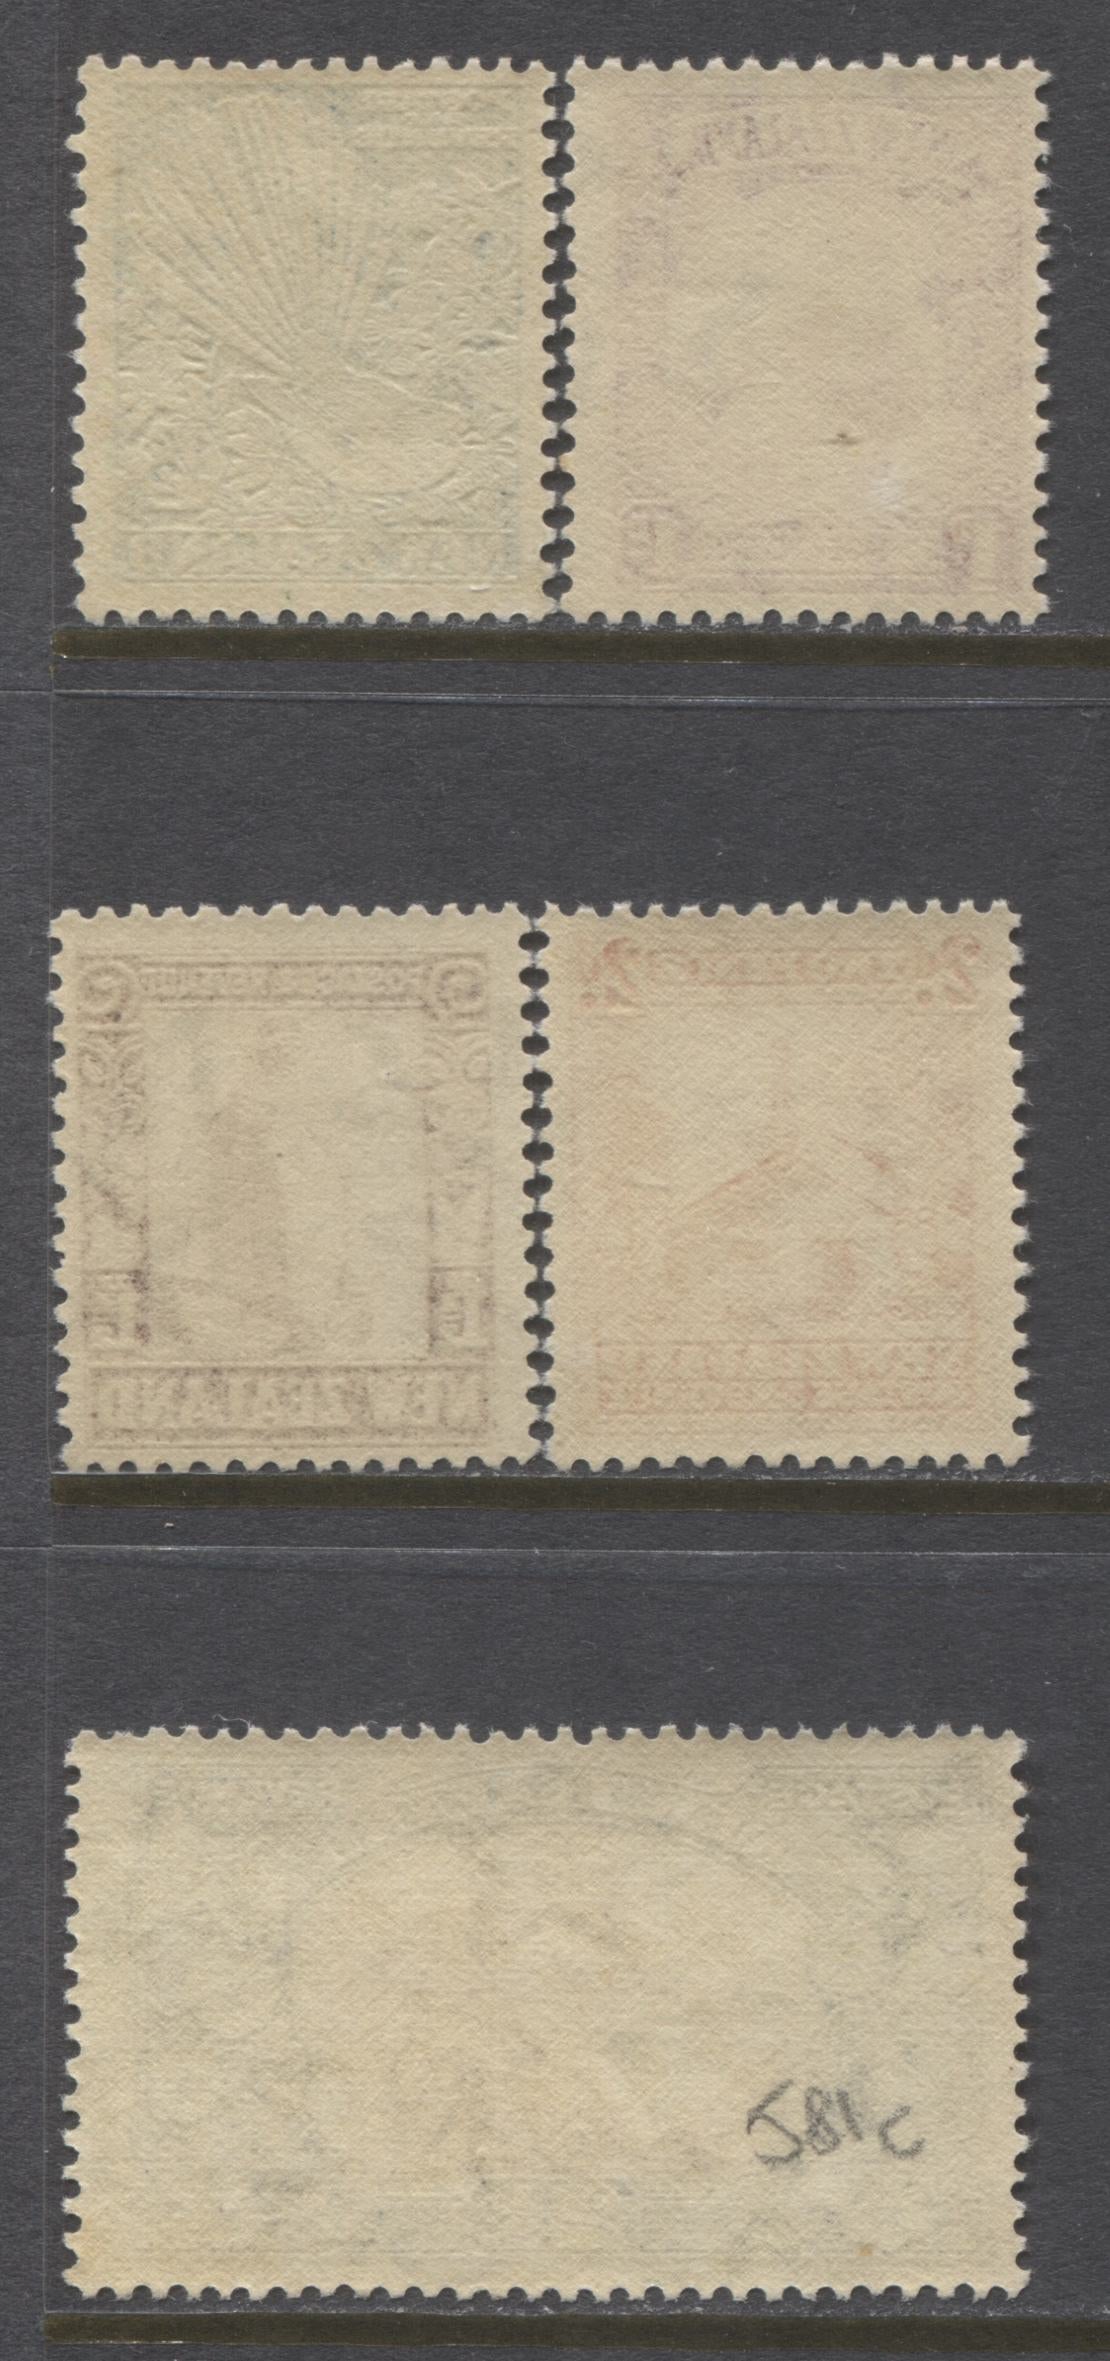 Lot 67 New Zealand SG#577-581 1936-42 Pictorial Issue, A Partial Fine NH and VFNH Set From 1/2d to 2.5d. Mult NZ & Star WMK. P. 14 x 13.5, SG. Cat. 38.30 GBP = $65.88